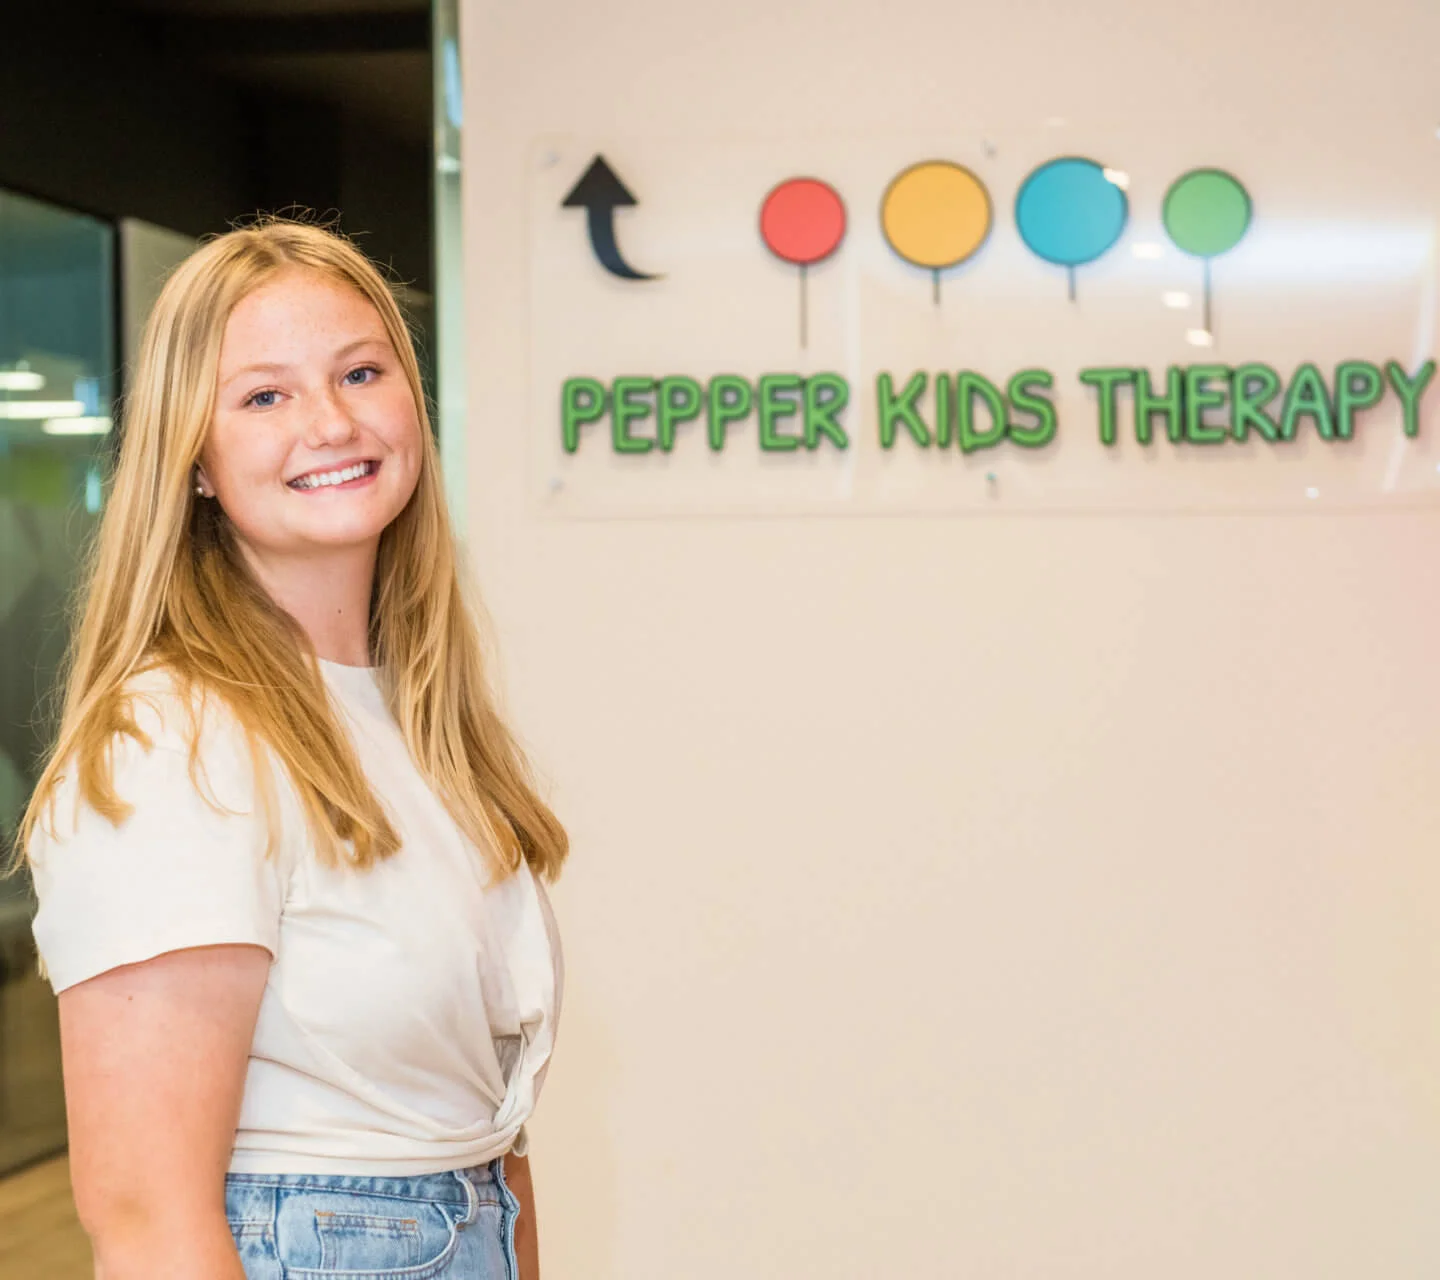 Pepper Kids Therapy